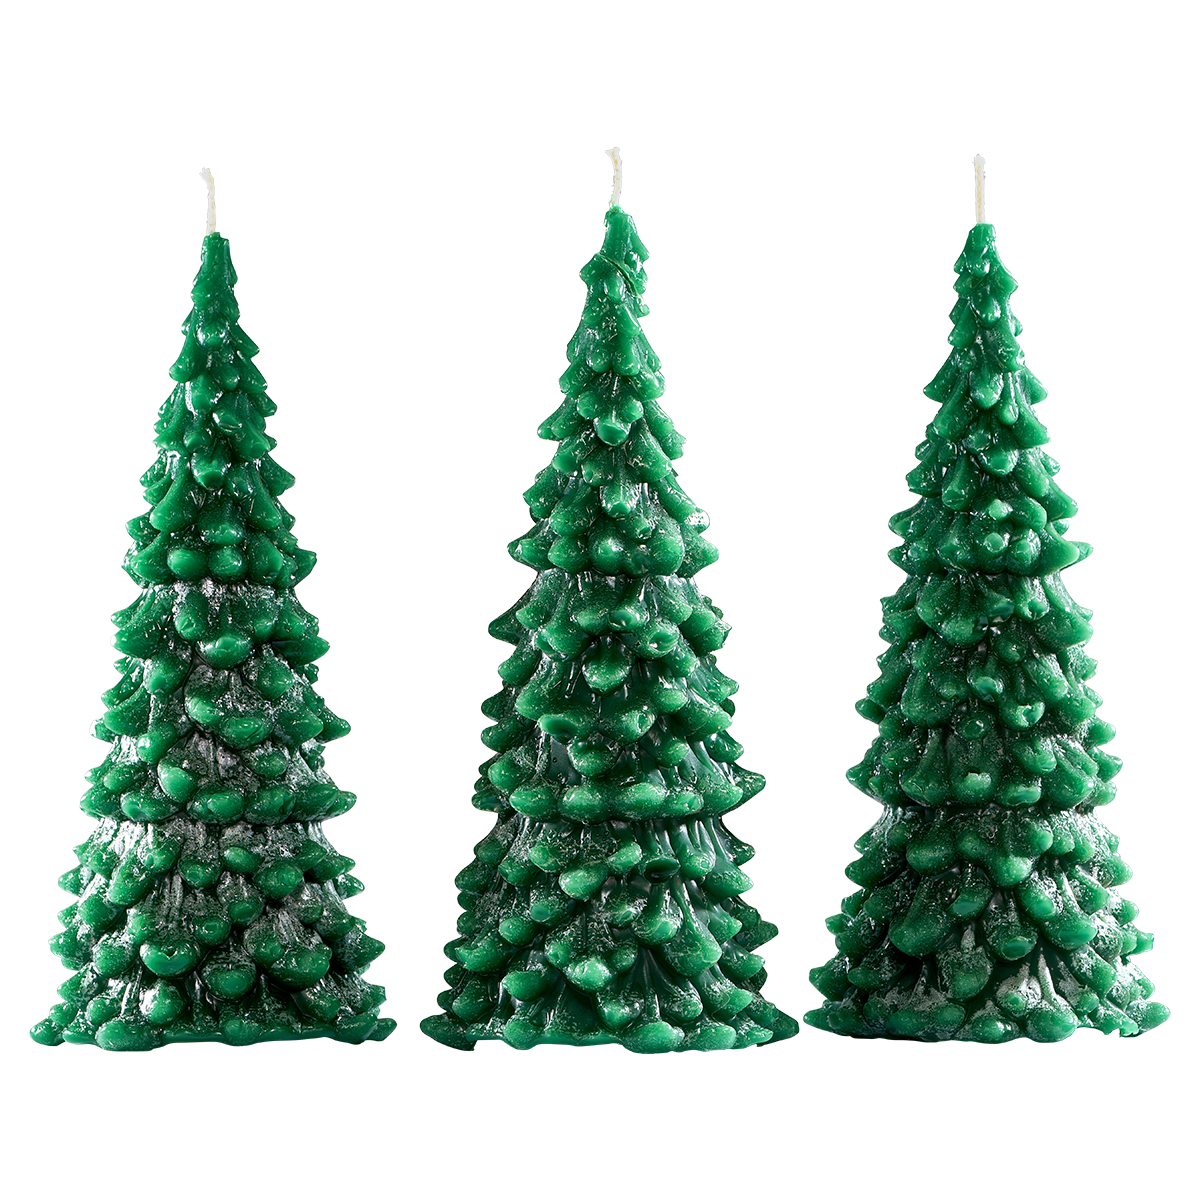 0000_christmas_tree_large_green_138_png.png